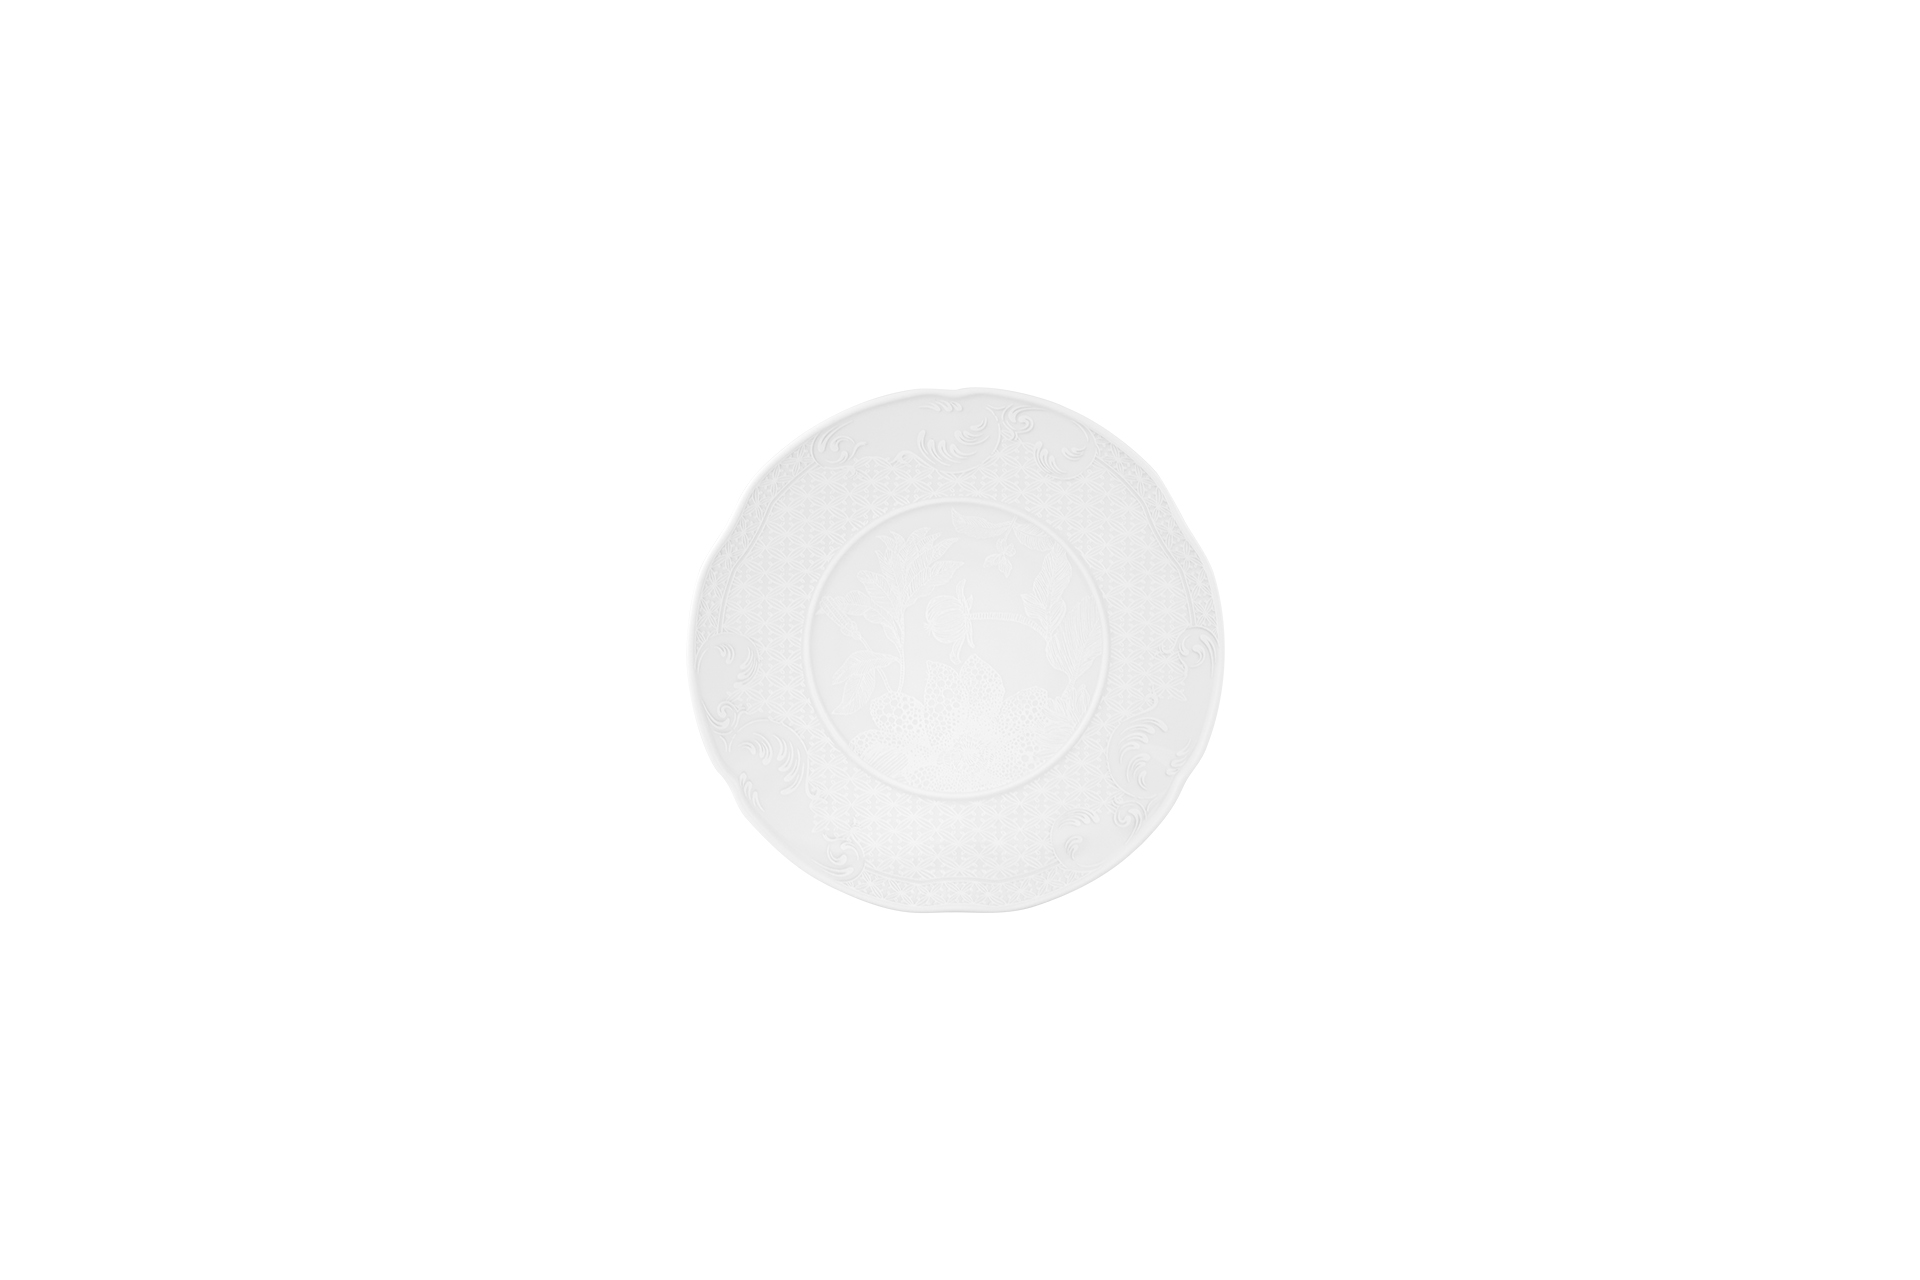 Bread and Butter Plate Vista Alegre Collection Duality Collection 18 cm